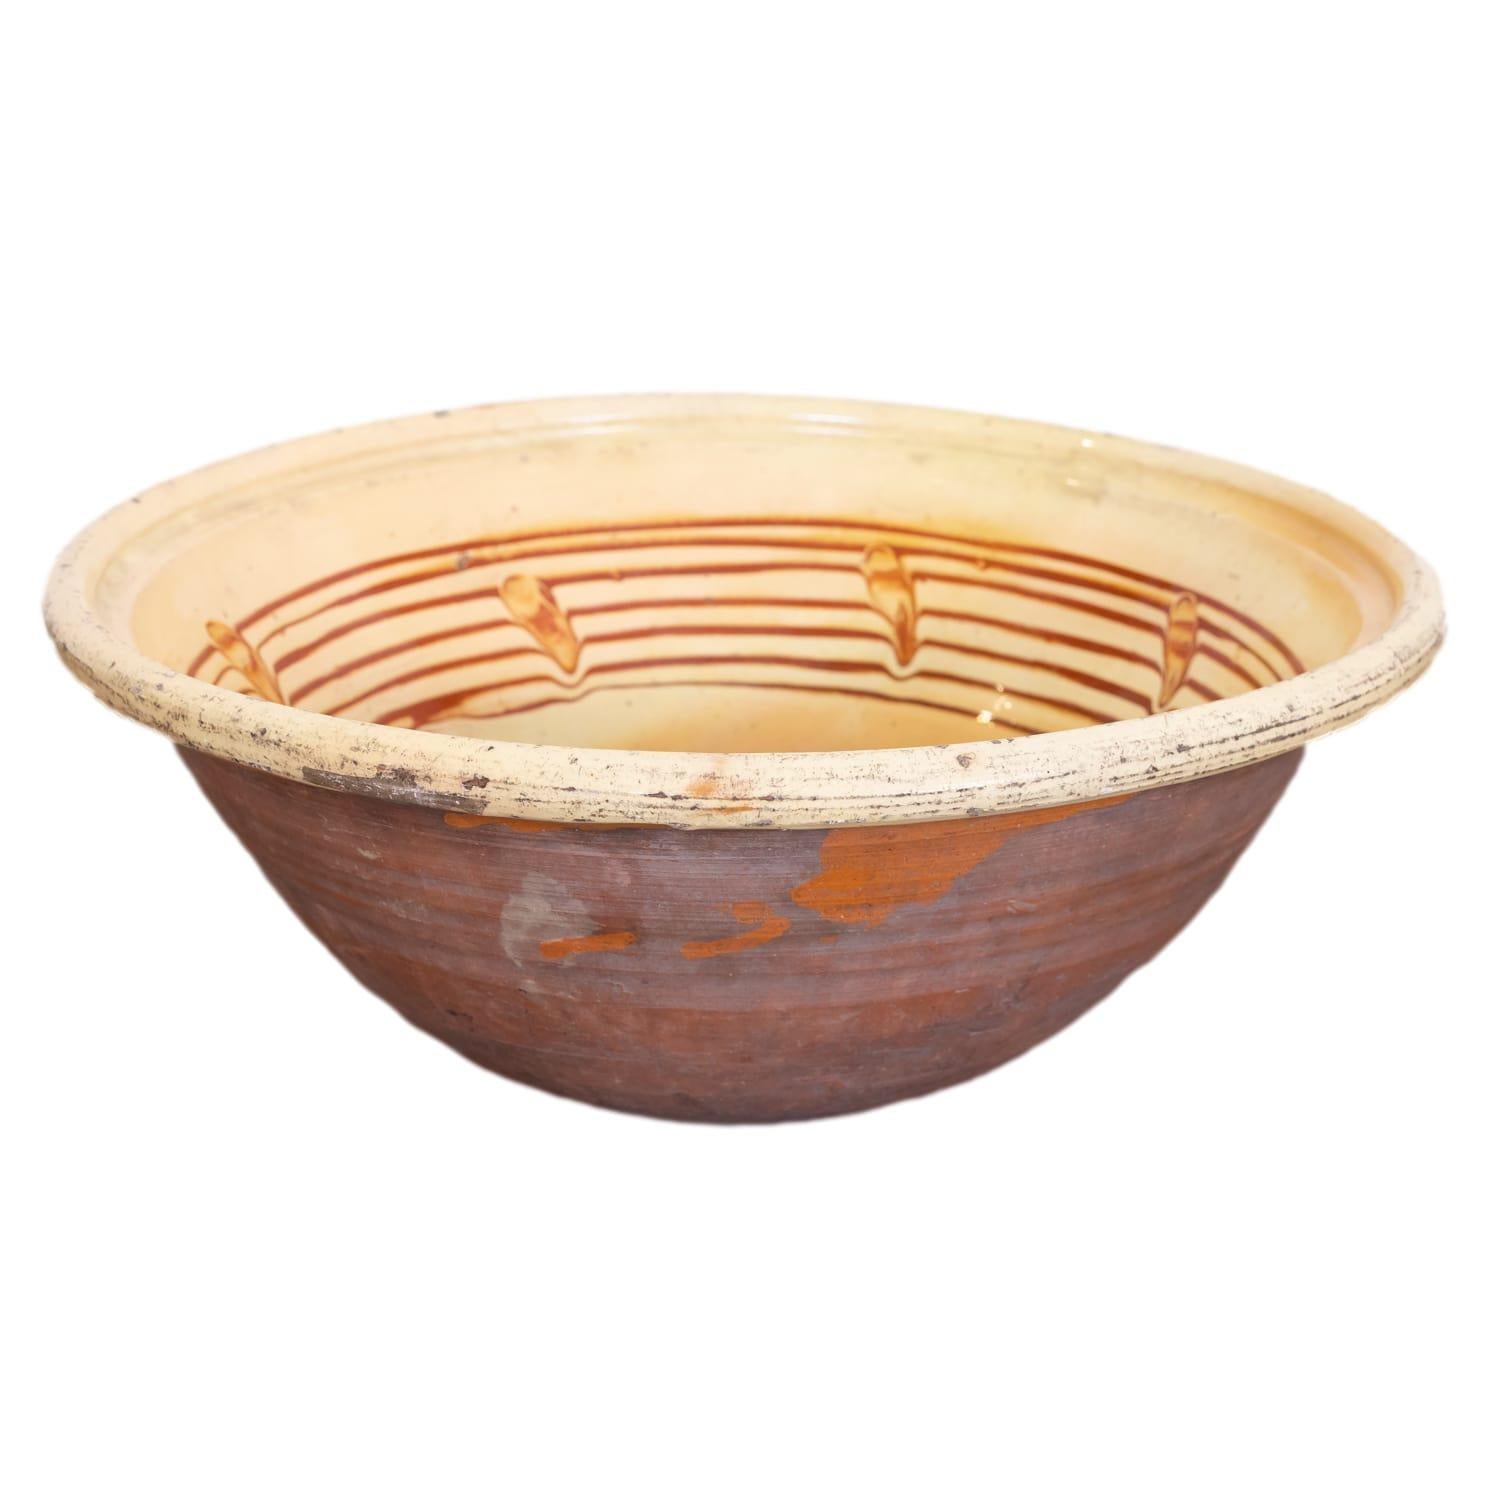 19th Century French Terracotta Pancheon or Dough Bowl with Pale Yellow Glaze For Sale